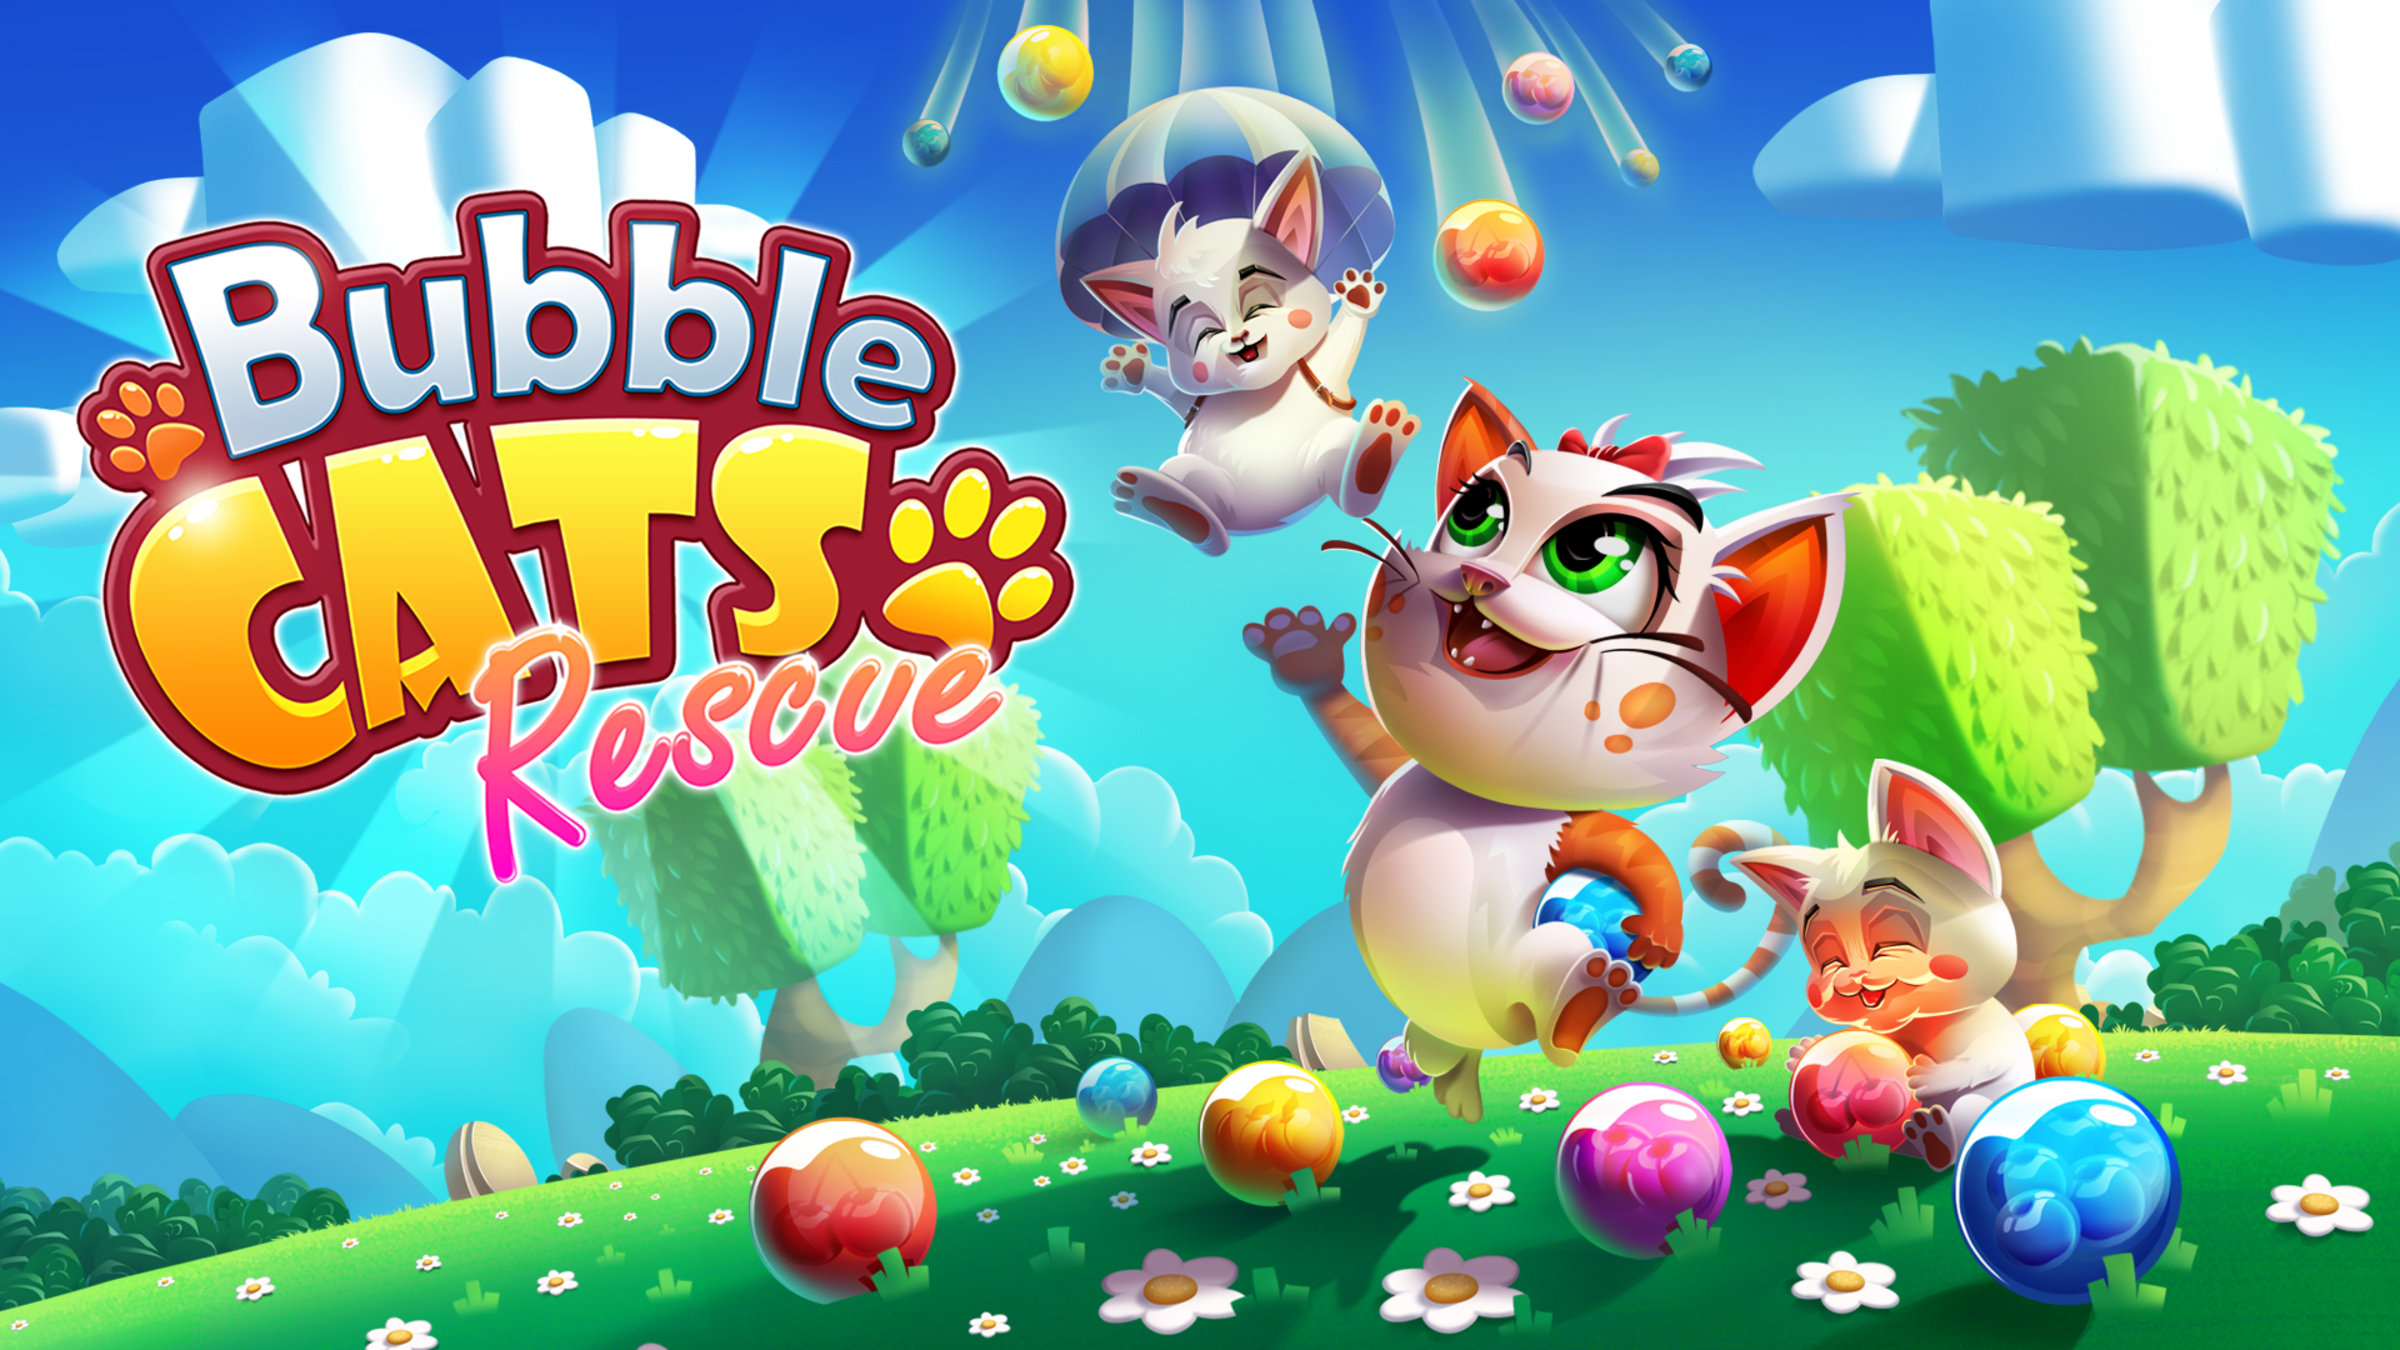 Bubble Cats Rescue for Nintendo Switch - Nintendo Official Site